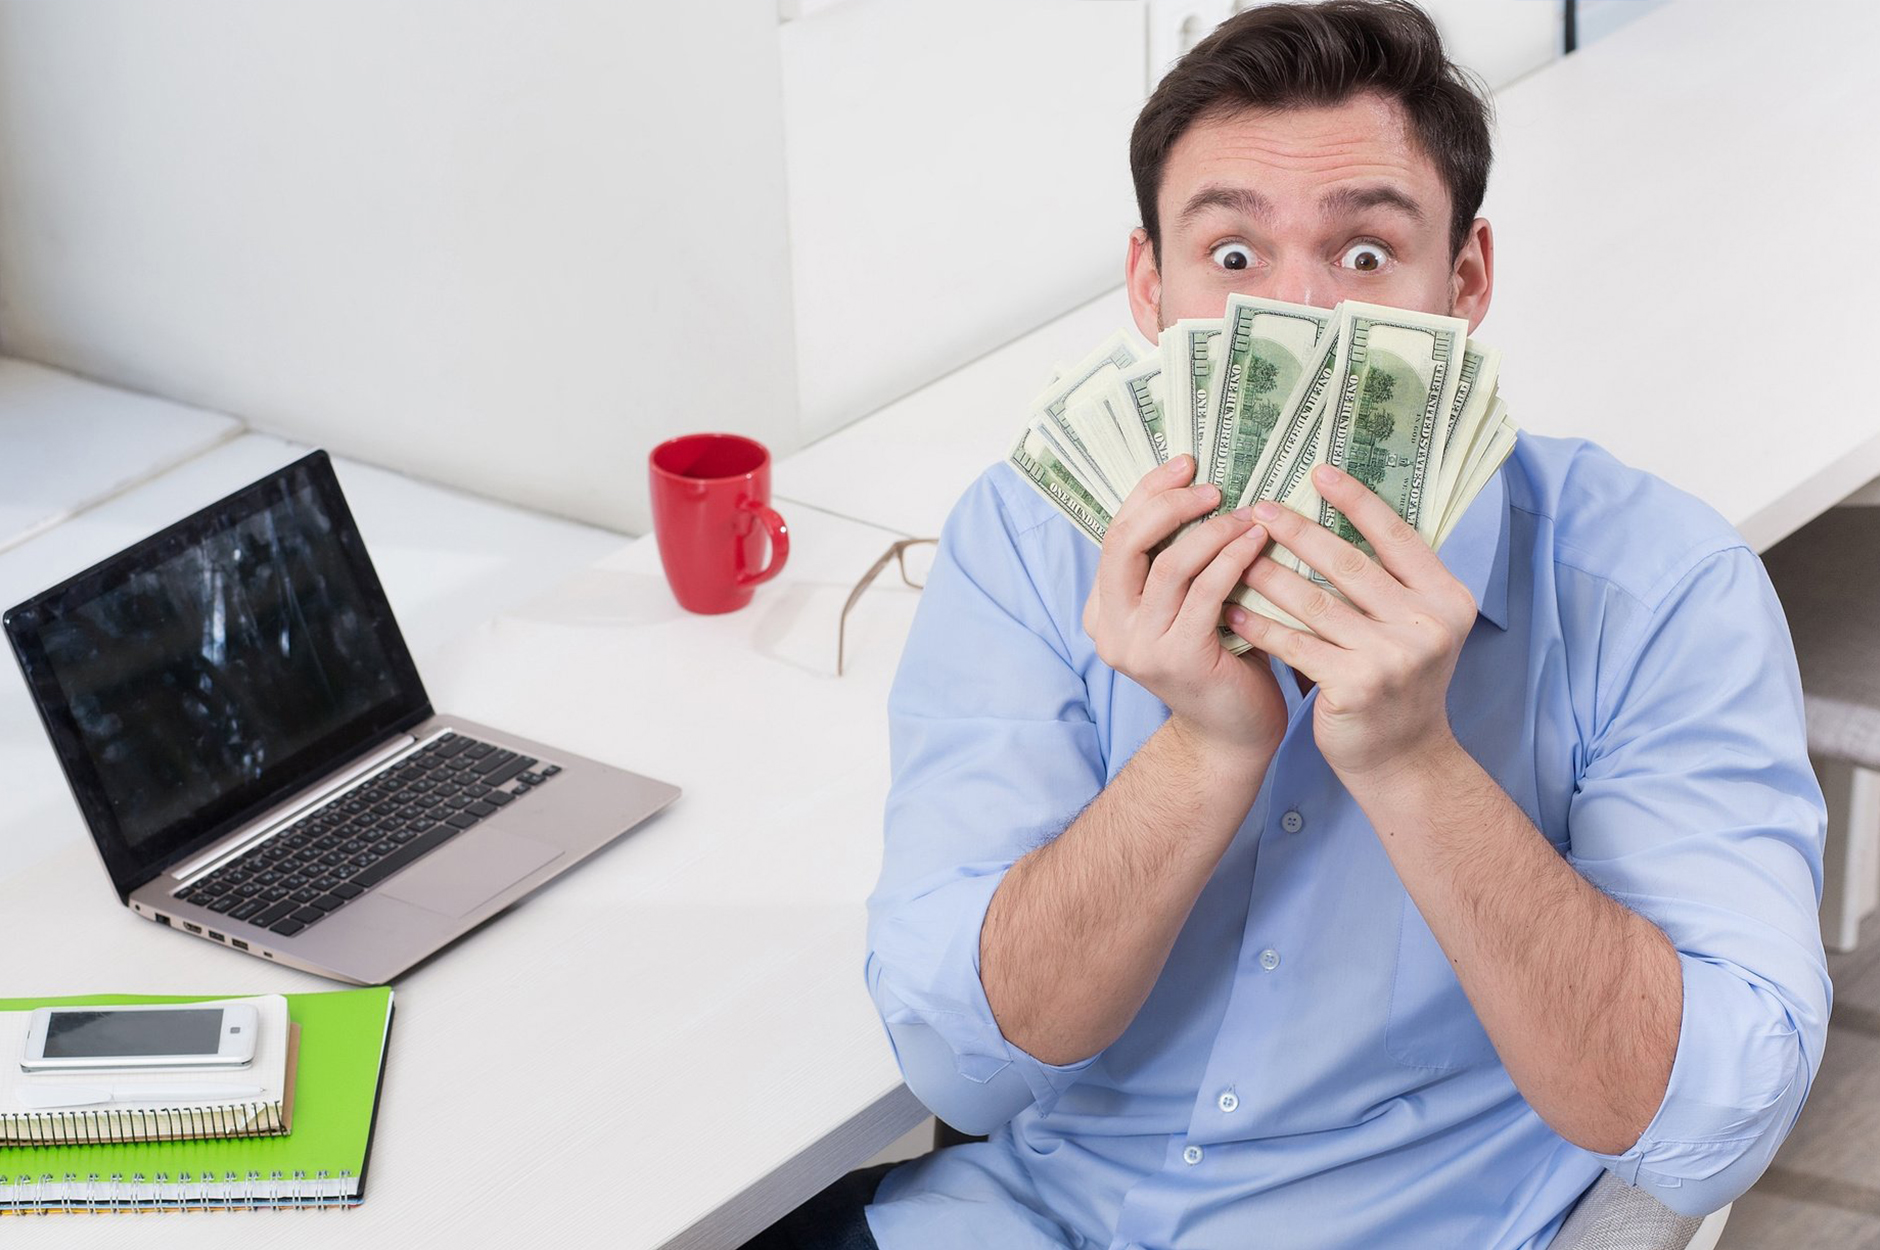 12 Easy Ways to Make Money Online Quickly from Home - New Template